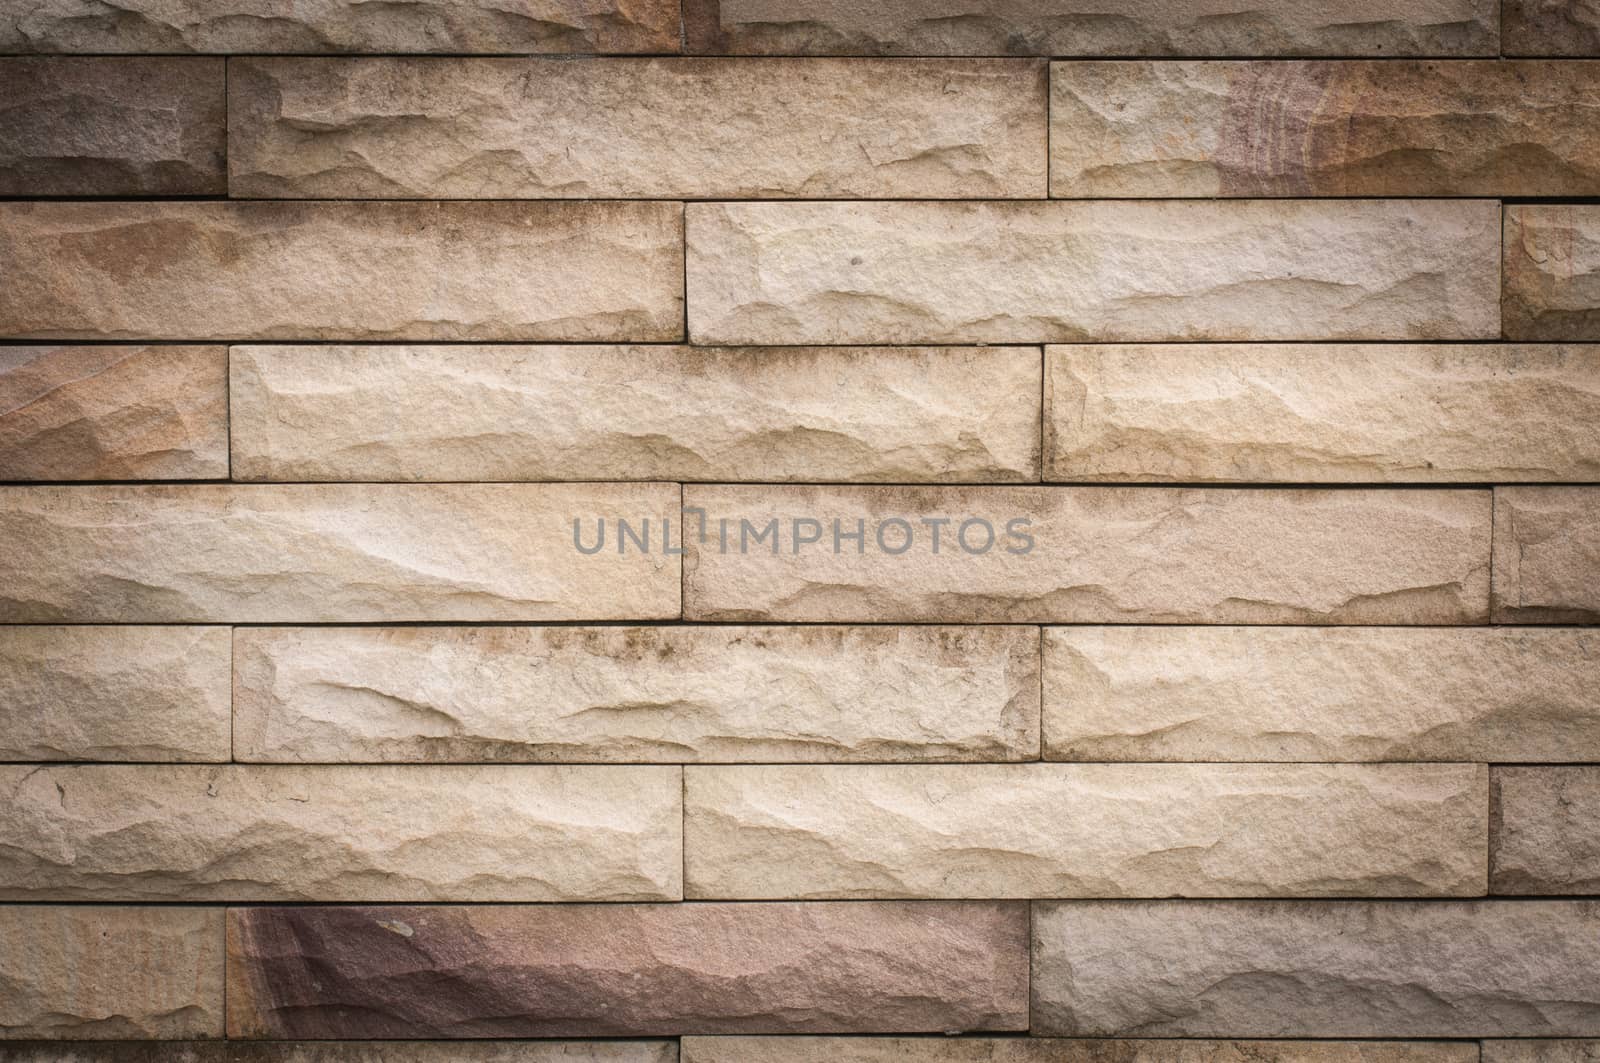 Square well stone texture and background wallpaper